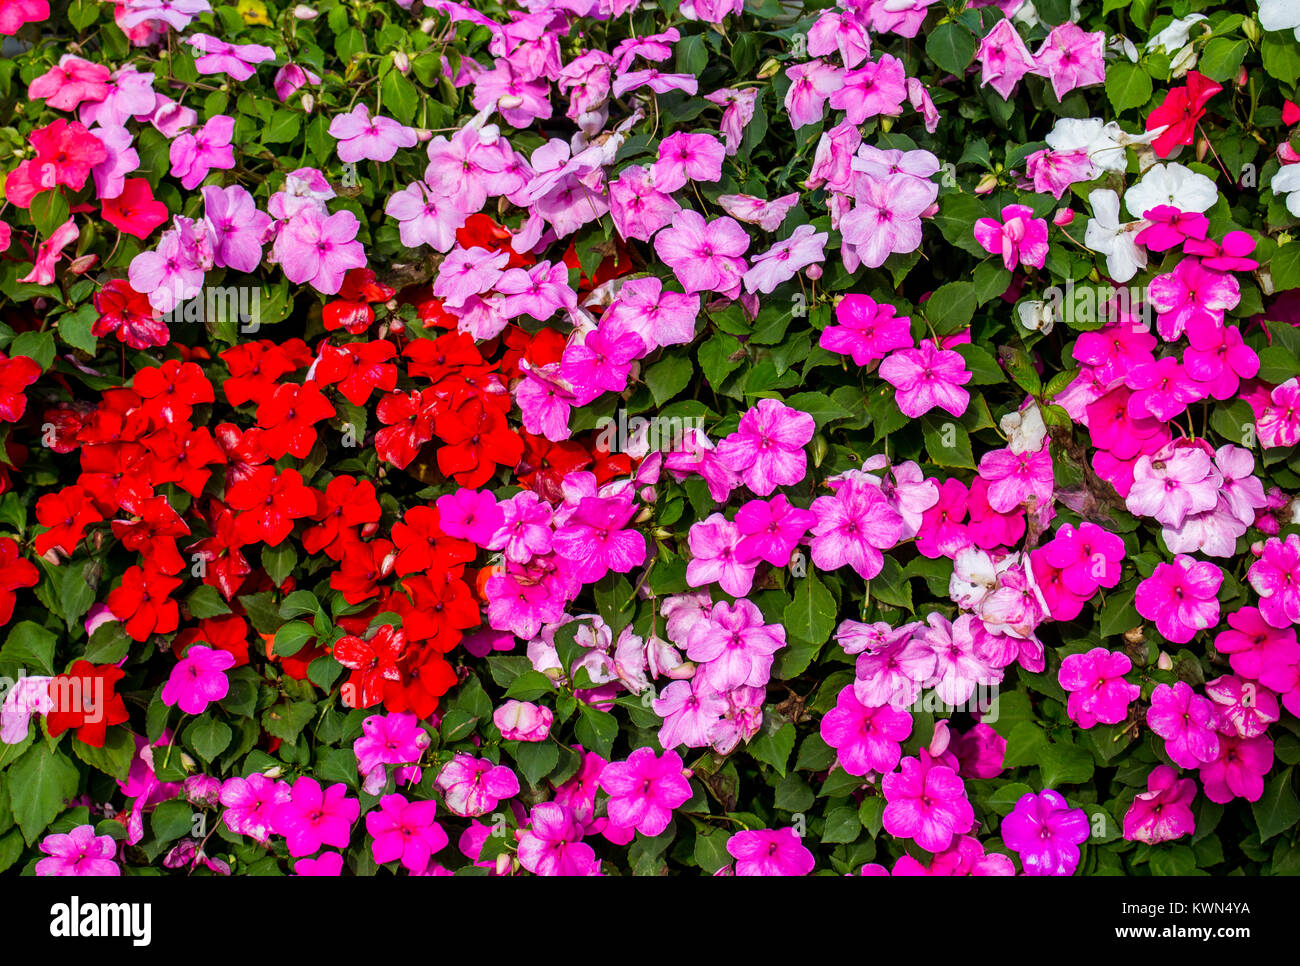 Background and texture of colorful Impatiens (Impatiens walleriana) flowers in the garden. Stock Photo